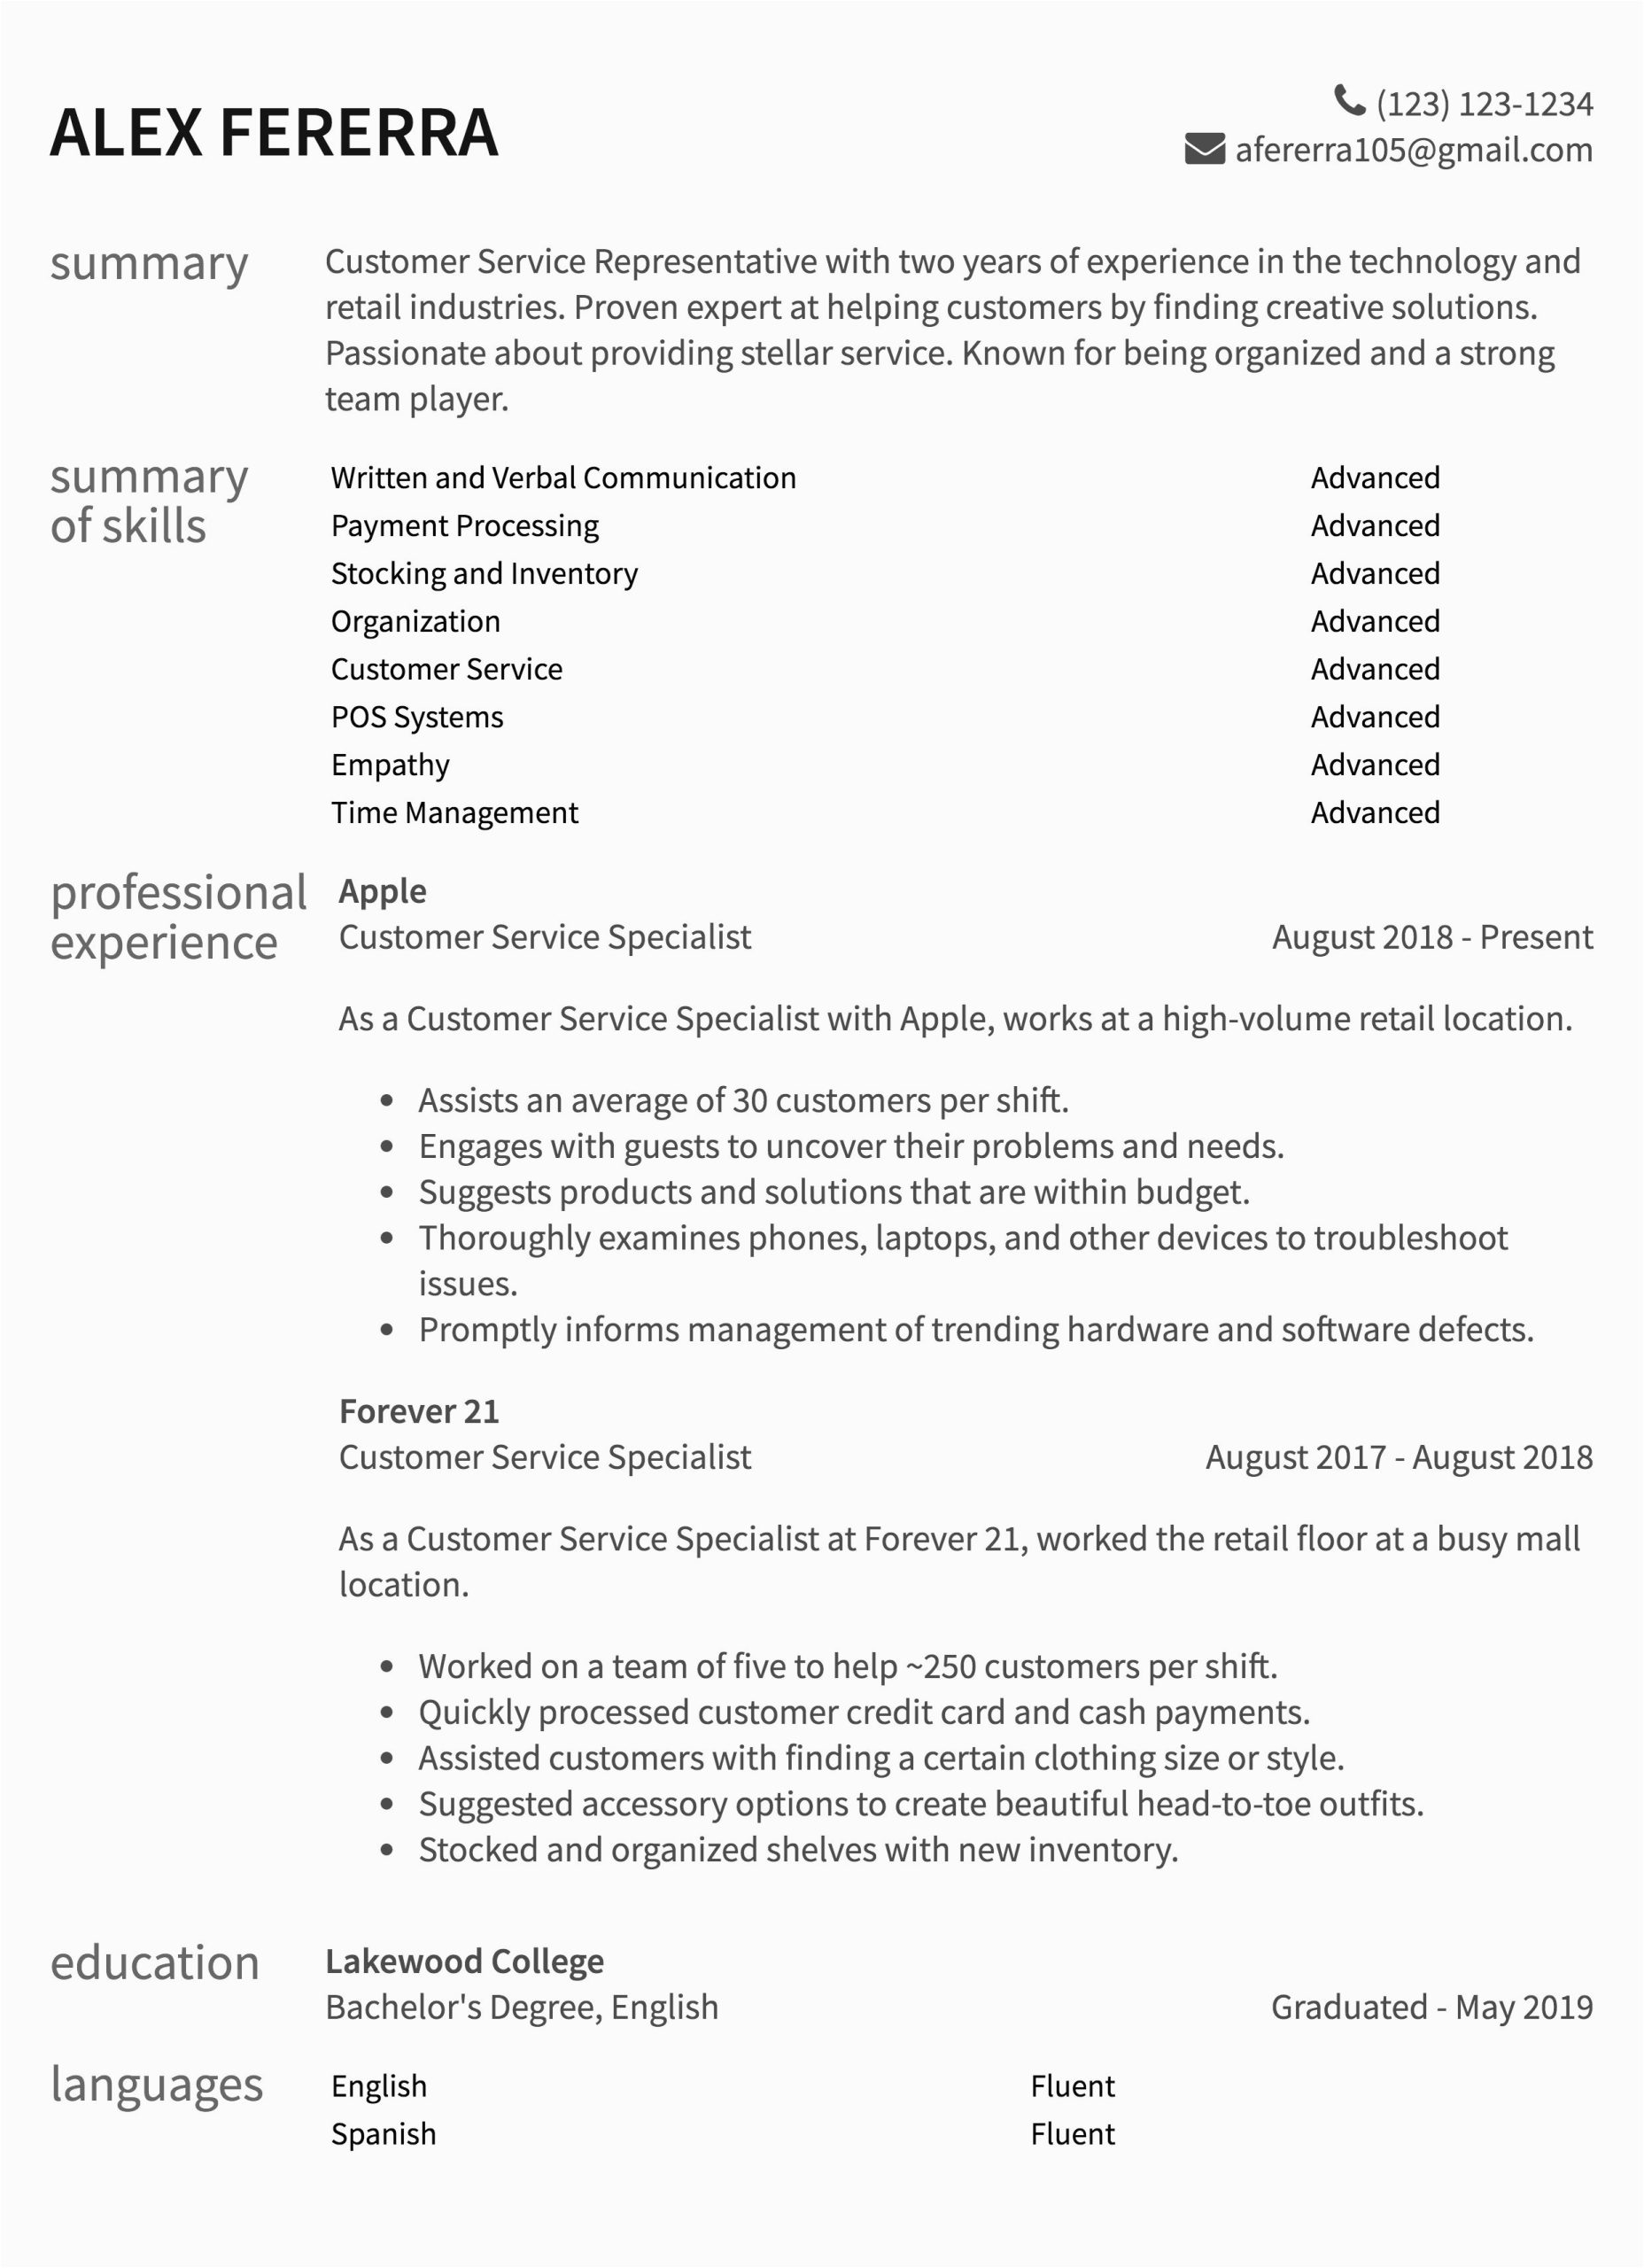 Sample for Resume for Customer Service Customer Service Resume Samples & How to Guide